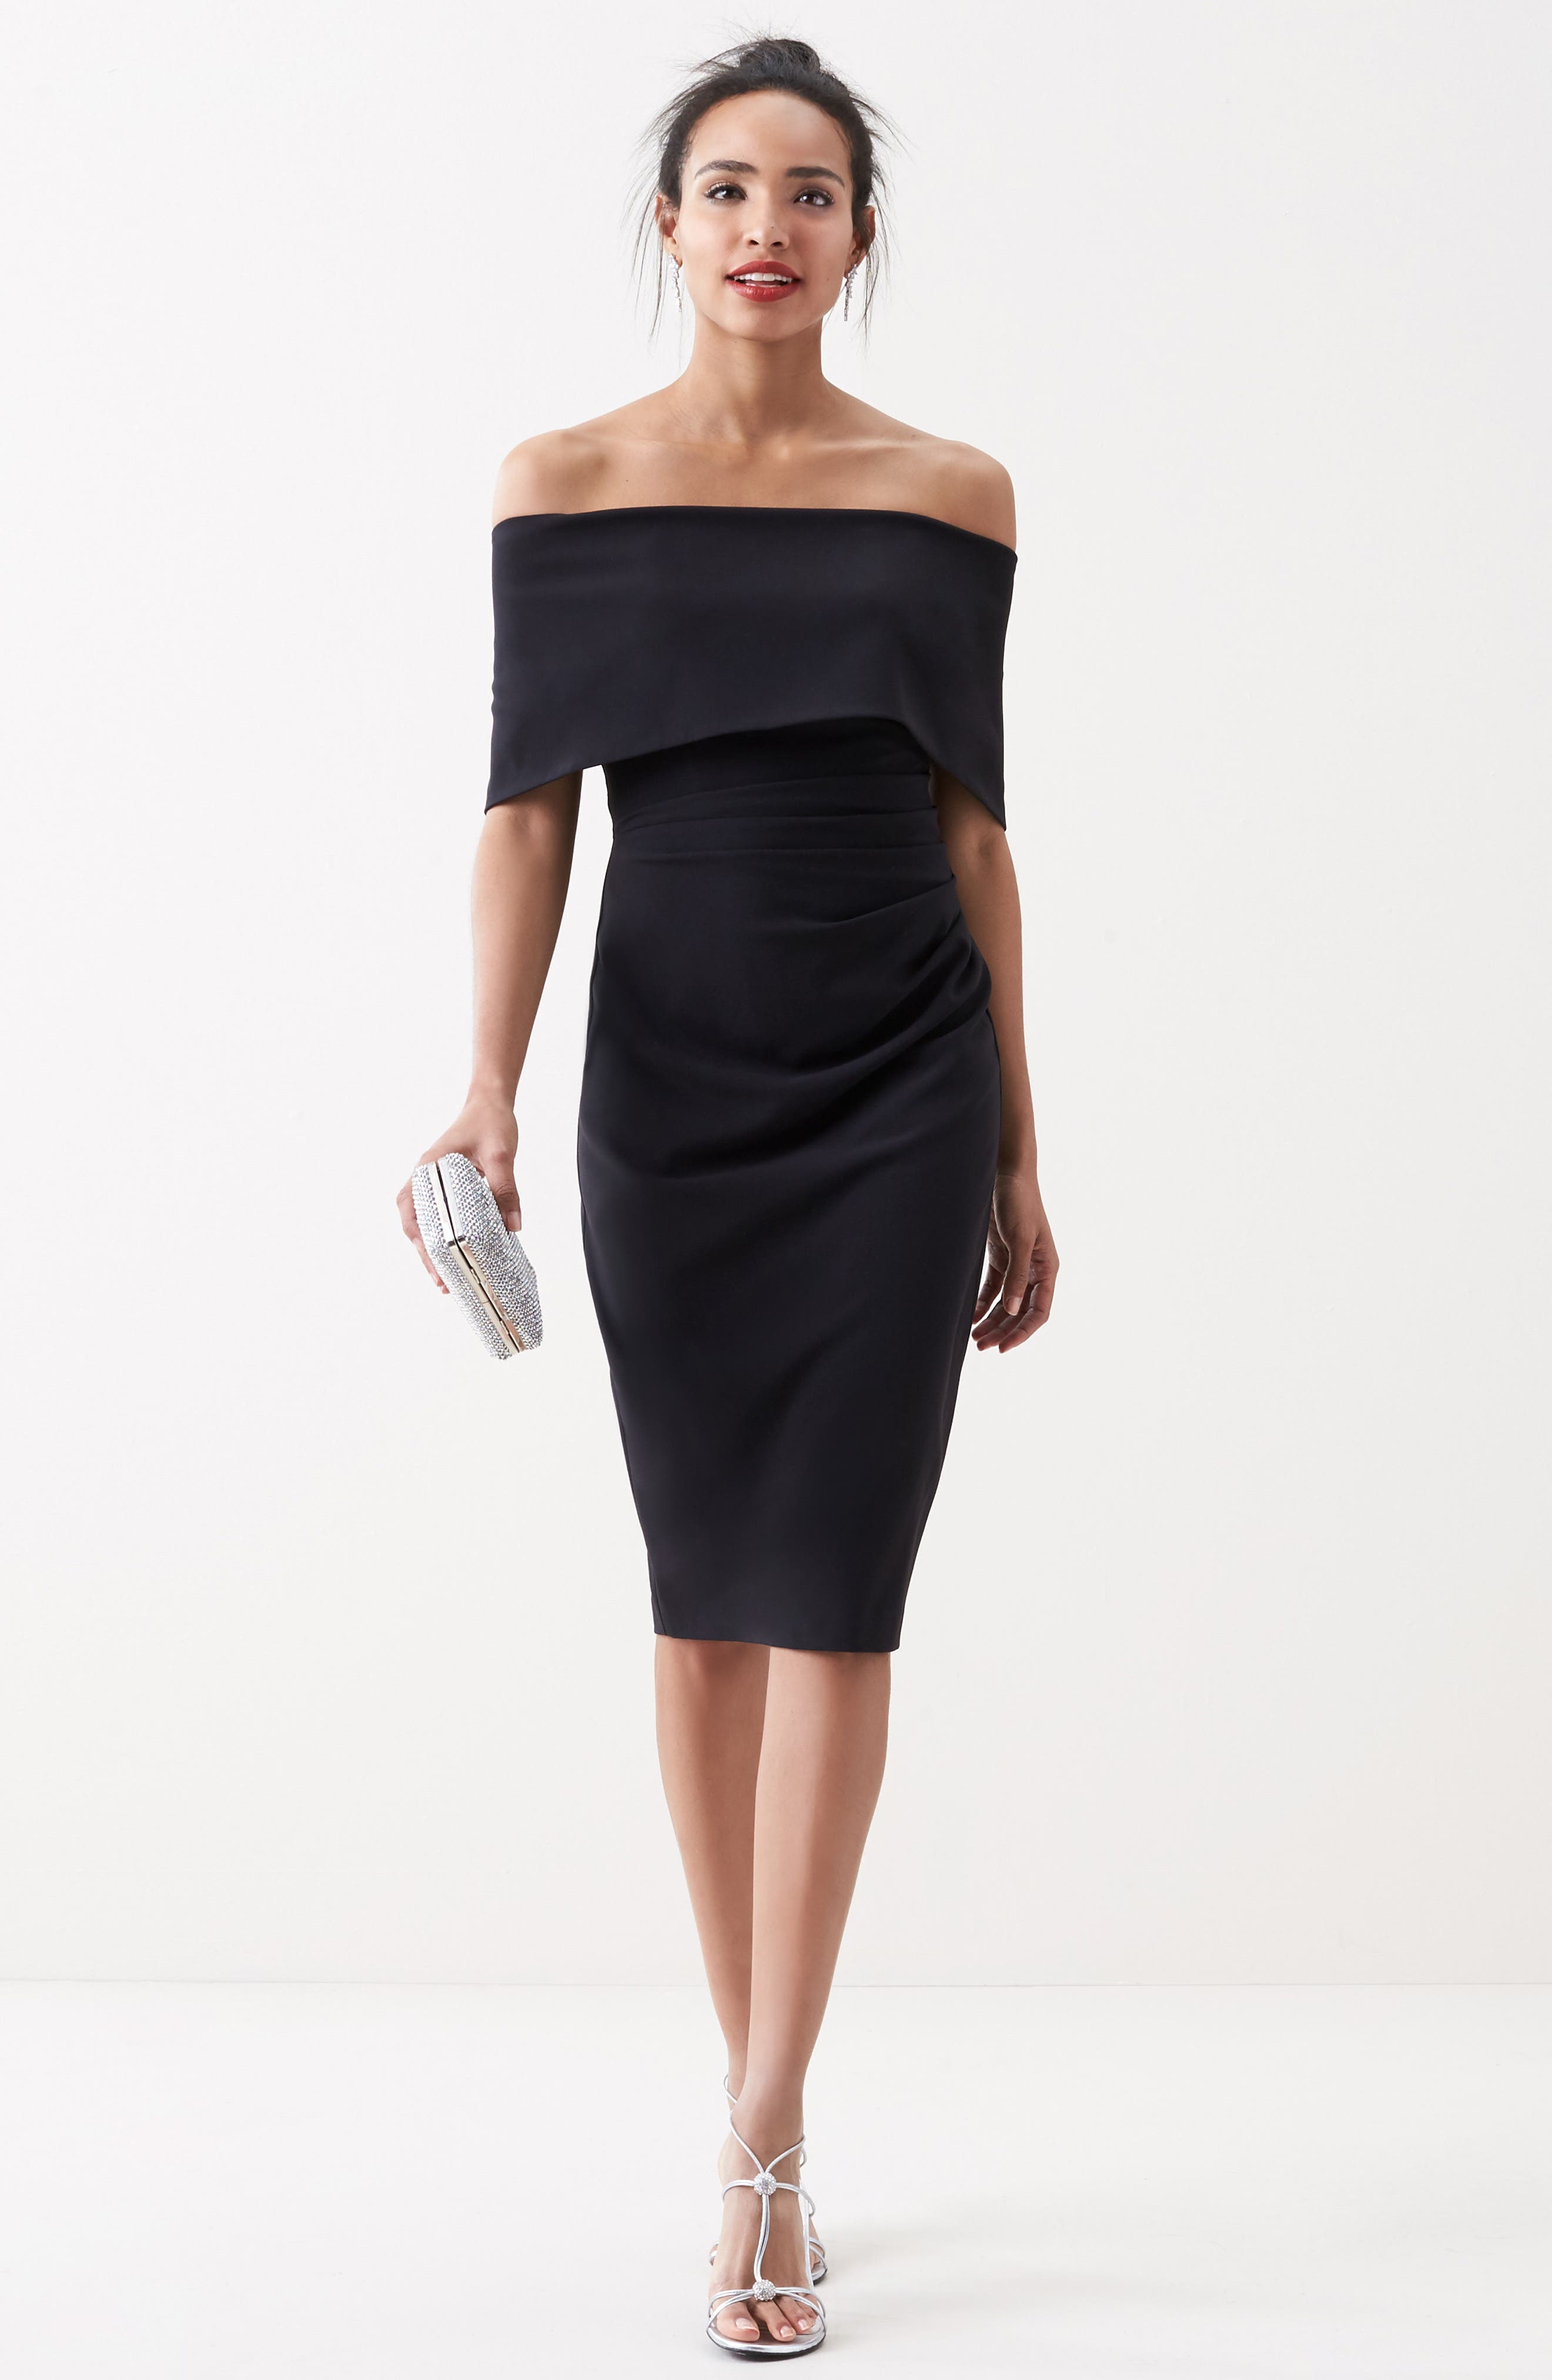 Hasil gambar untuk Office Holiday Party Cocktail Dresses BEST HOLIDAY PARTY DRESSES FOR ANY OCCASION